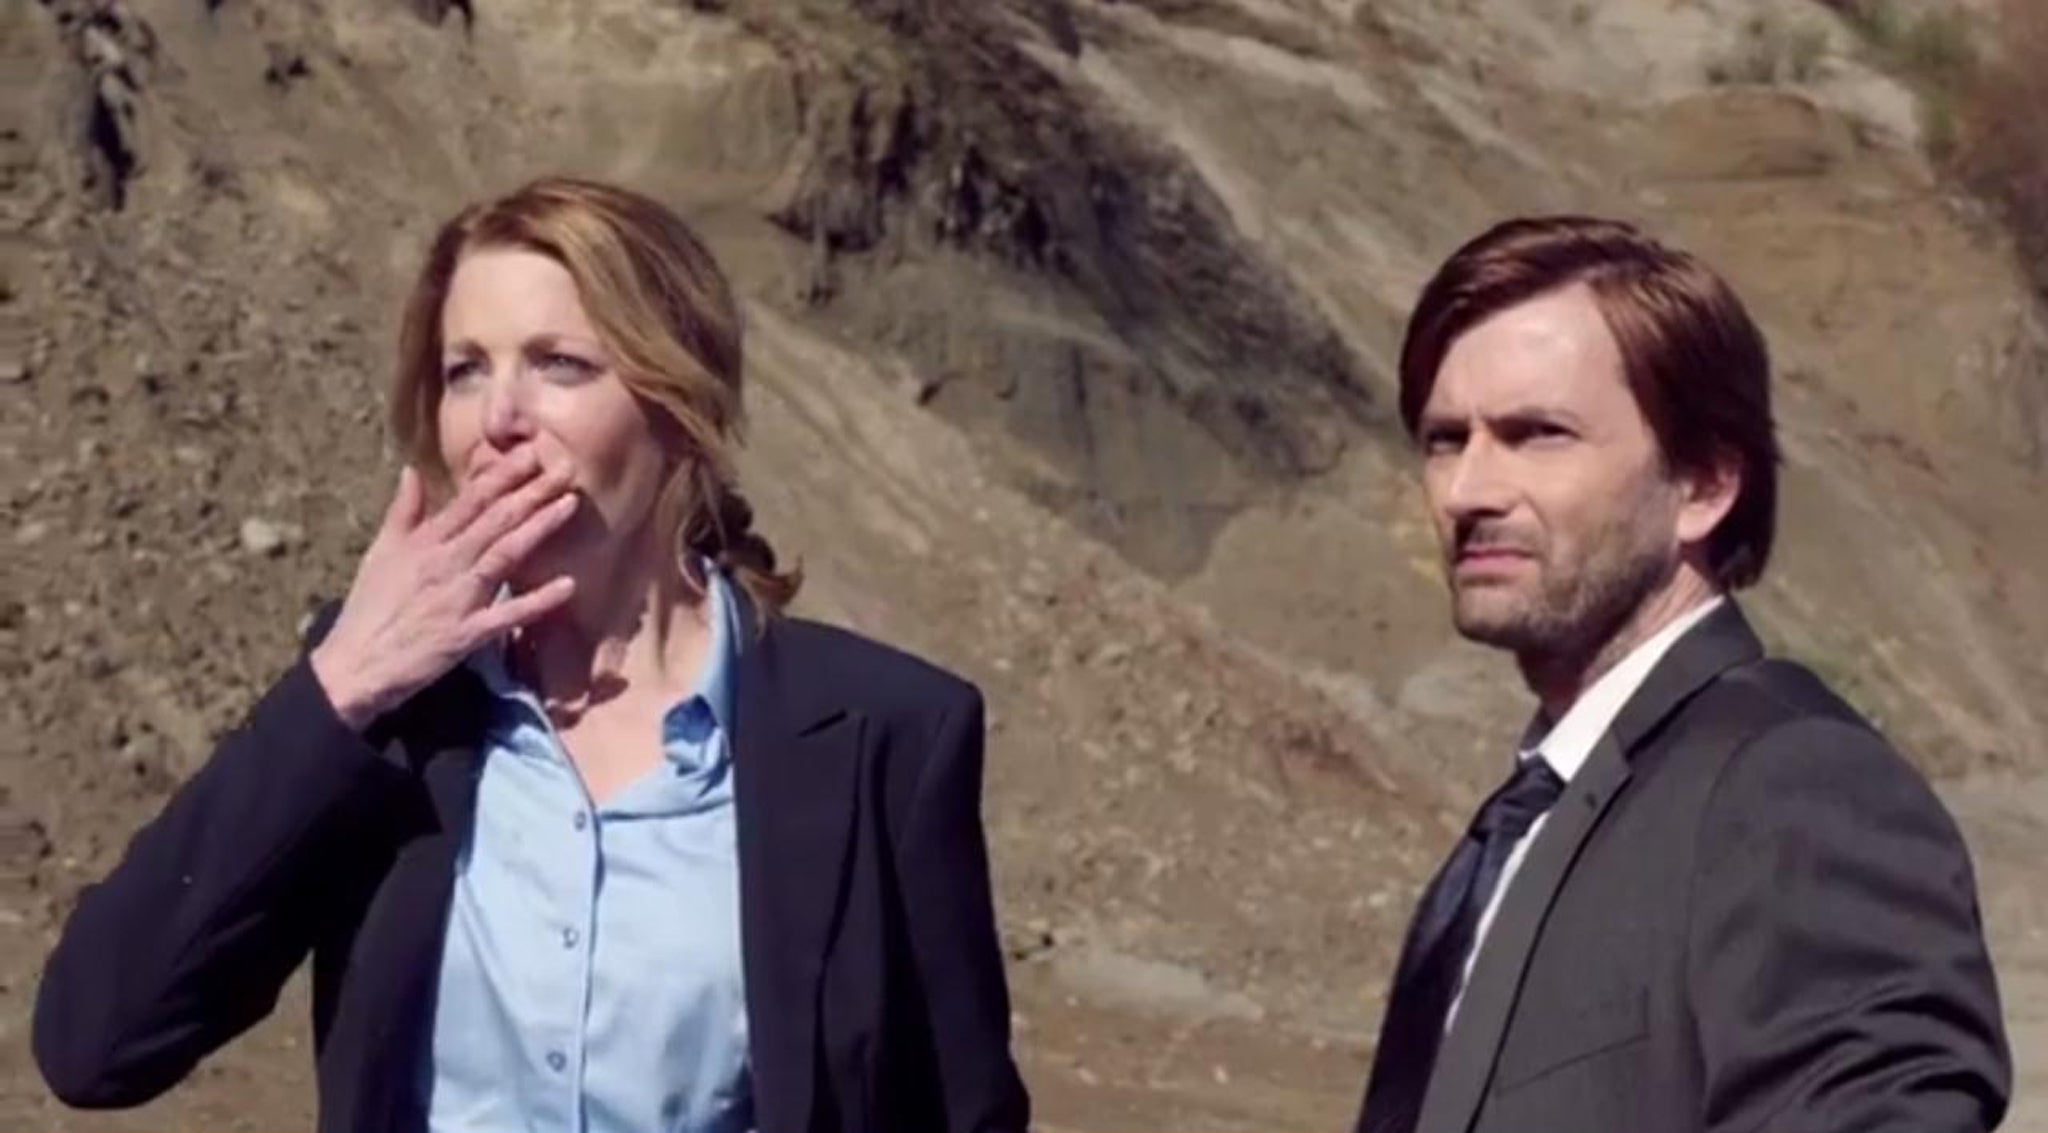 Anna Gunn and David Tennant star in 'Gracepoint', the US version of Broadchurch